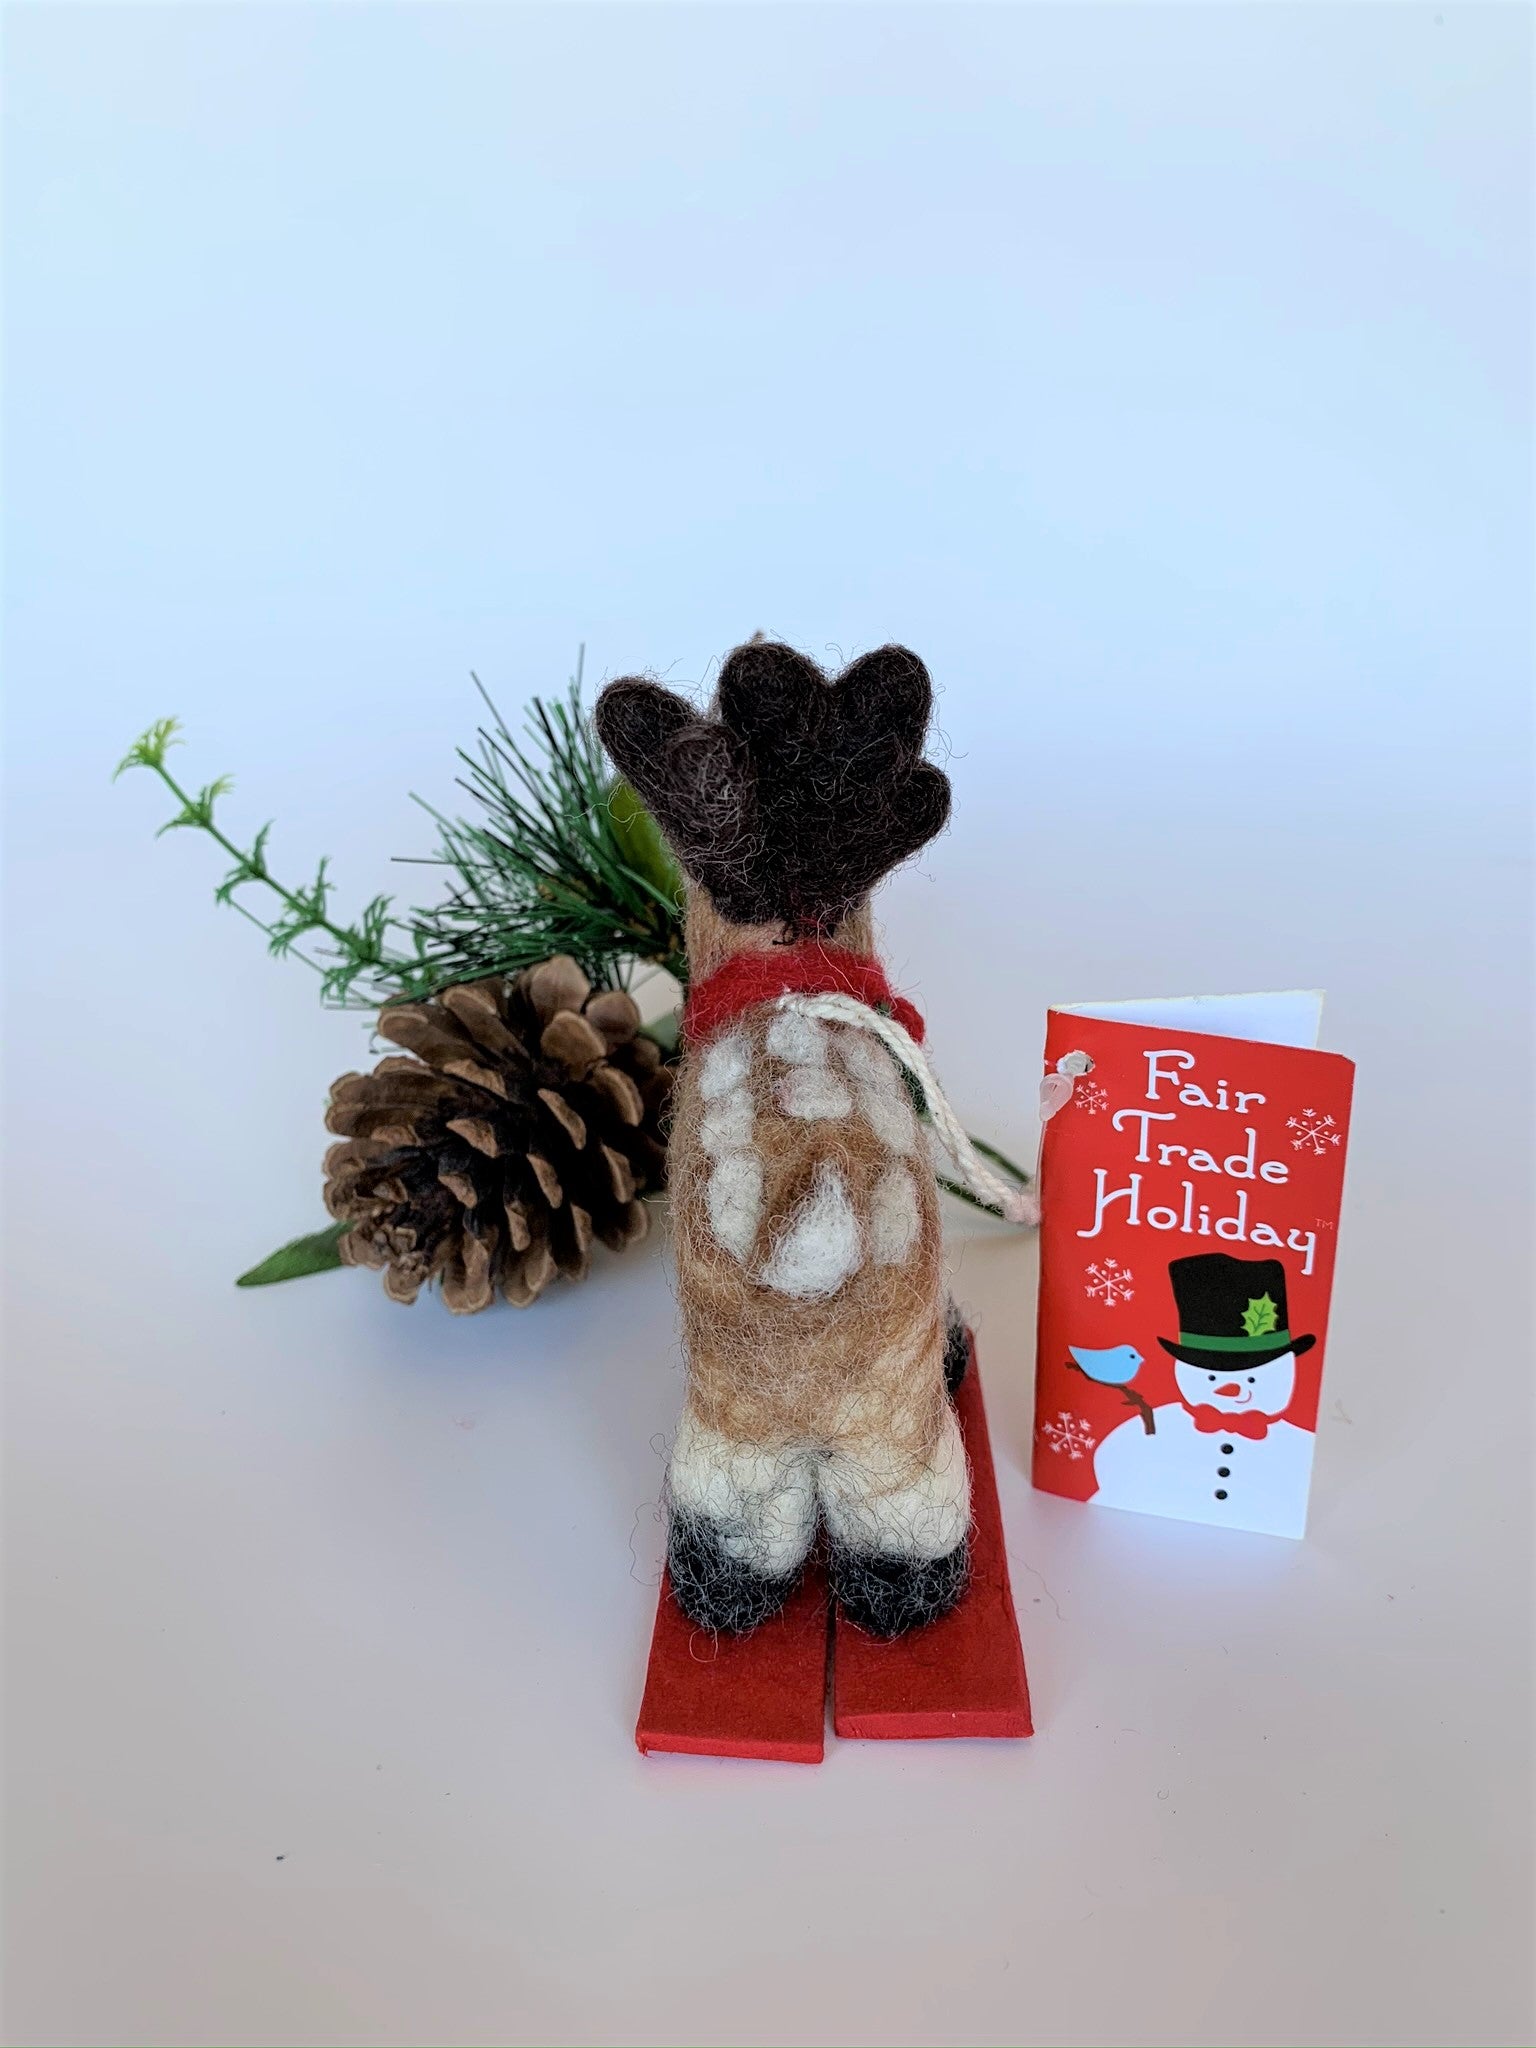 This is a back view of the skiing Rudolph the red-nosed reindeer Christmas ornament that is handcrafted (fair trade) from 100% natural wool. He is off-white and brown with brown ears and tail, dark brown antlers, black accents (feet, mouth, etc.) and a red nose. He wears a red and green winter scarf with an accent of holly and stands on a pair of red skis with green accents on the front. Approximately 3.5"x1.5"x1.75". He comes with a detachable fair trade holiday "to/from" tag to use if giving as a gift.